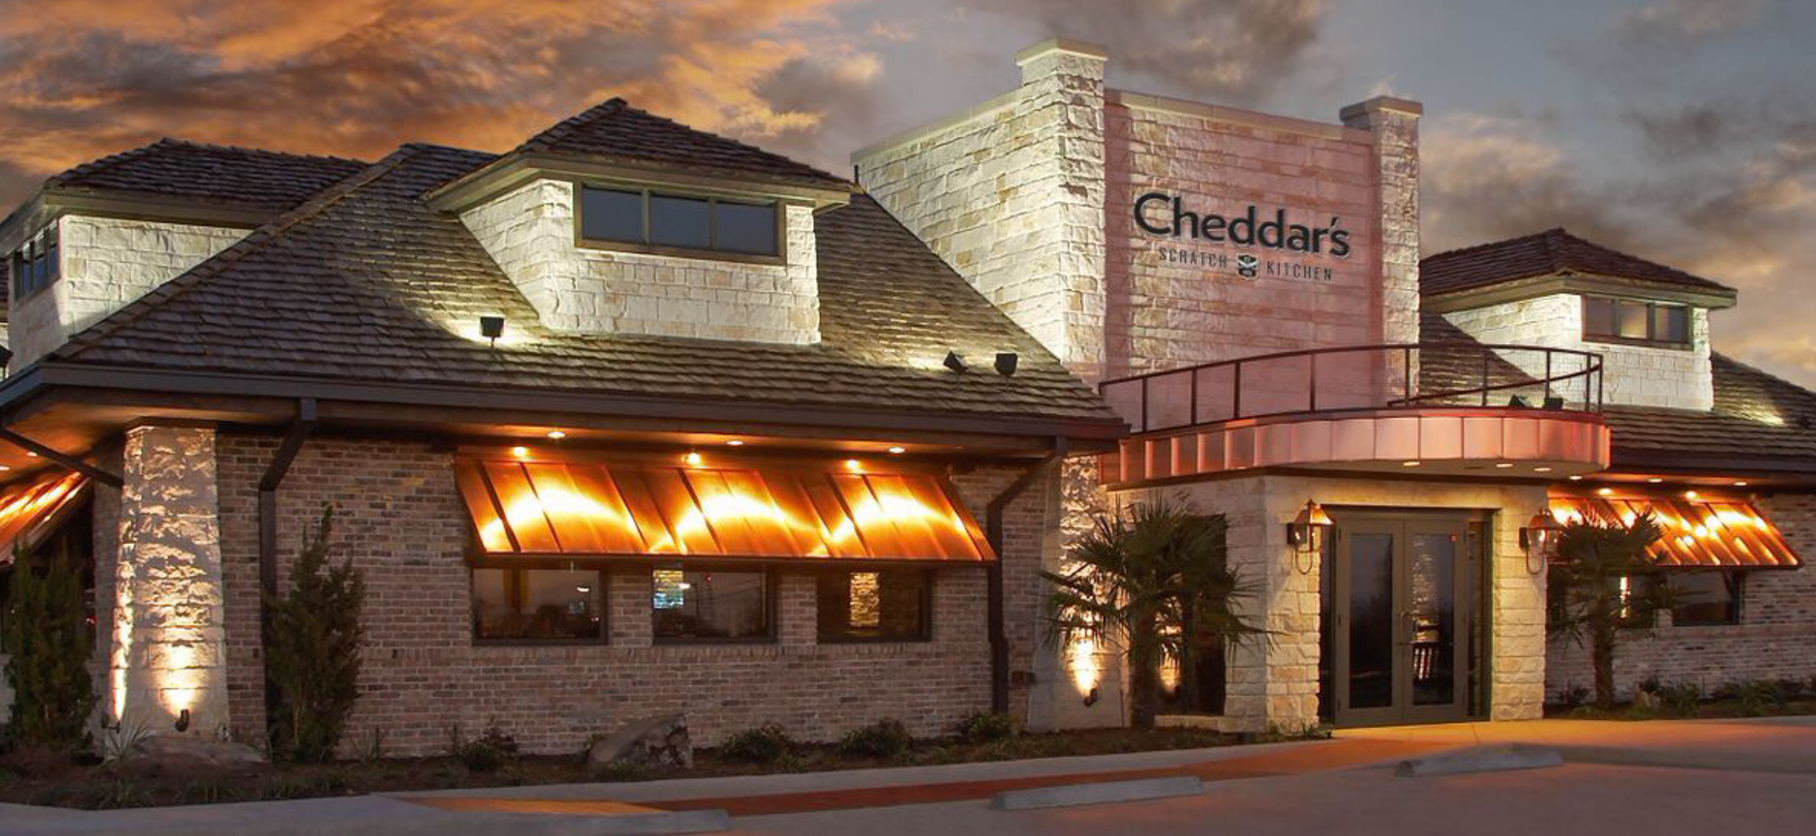 Cheddars Gives Eating Out a Fresh Start with locations ...